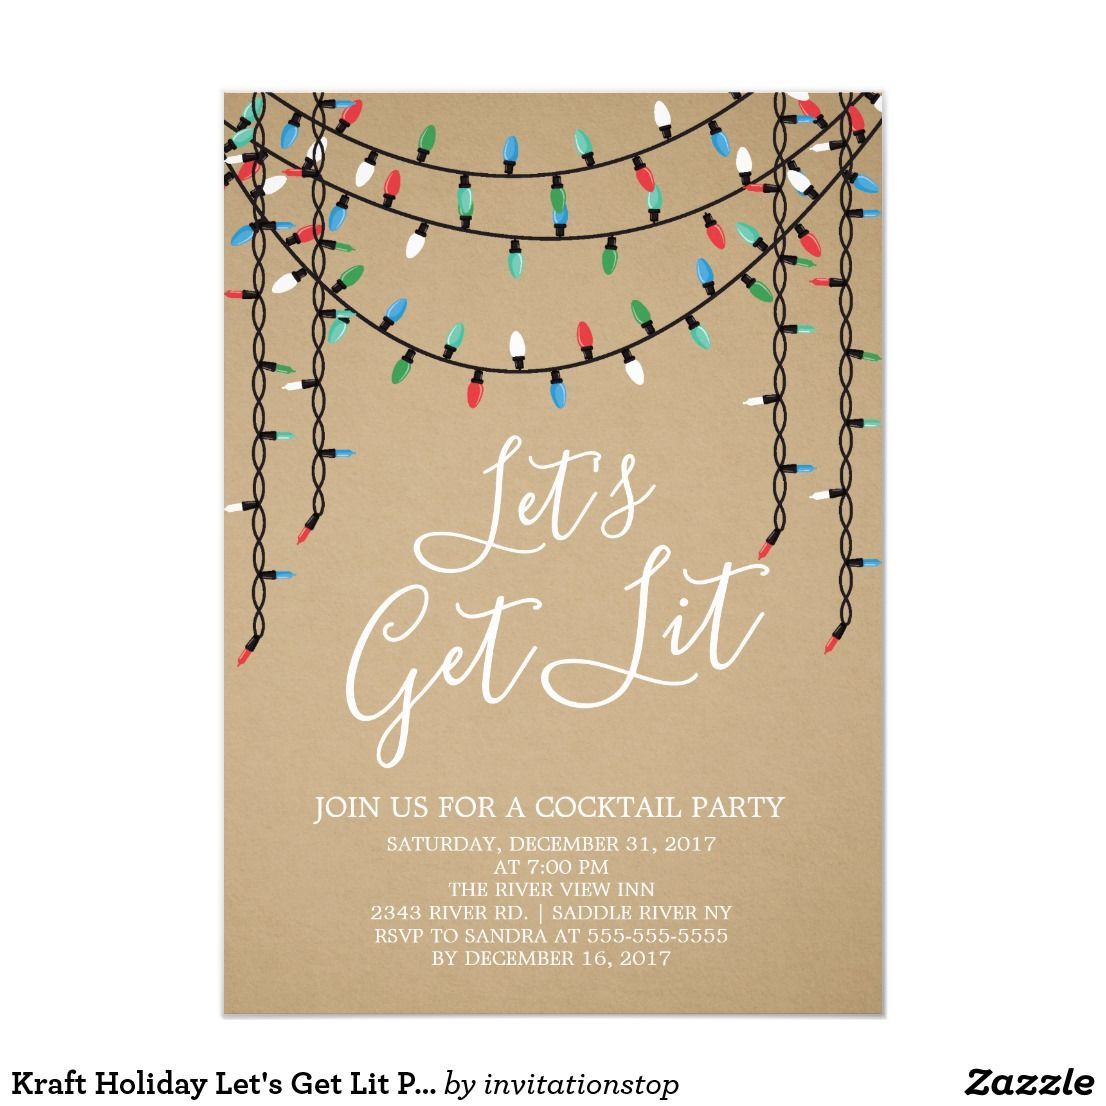 17 holiday Party quotes ideas